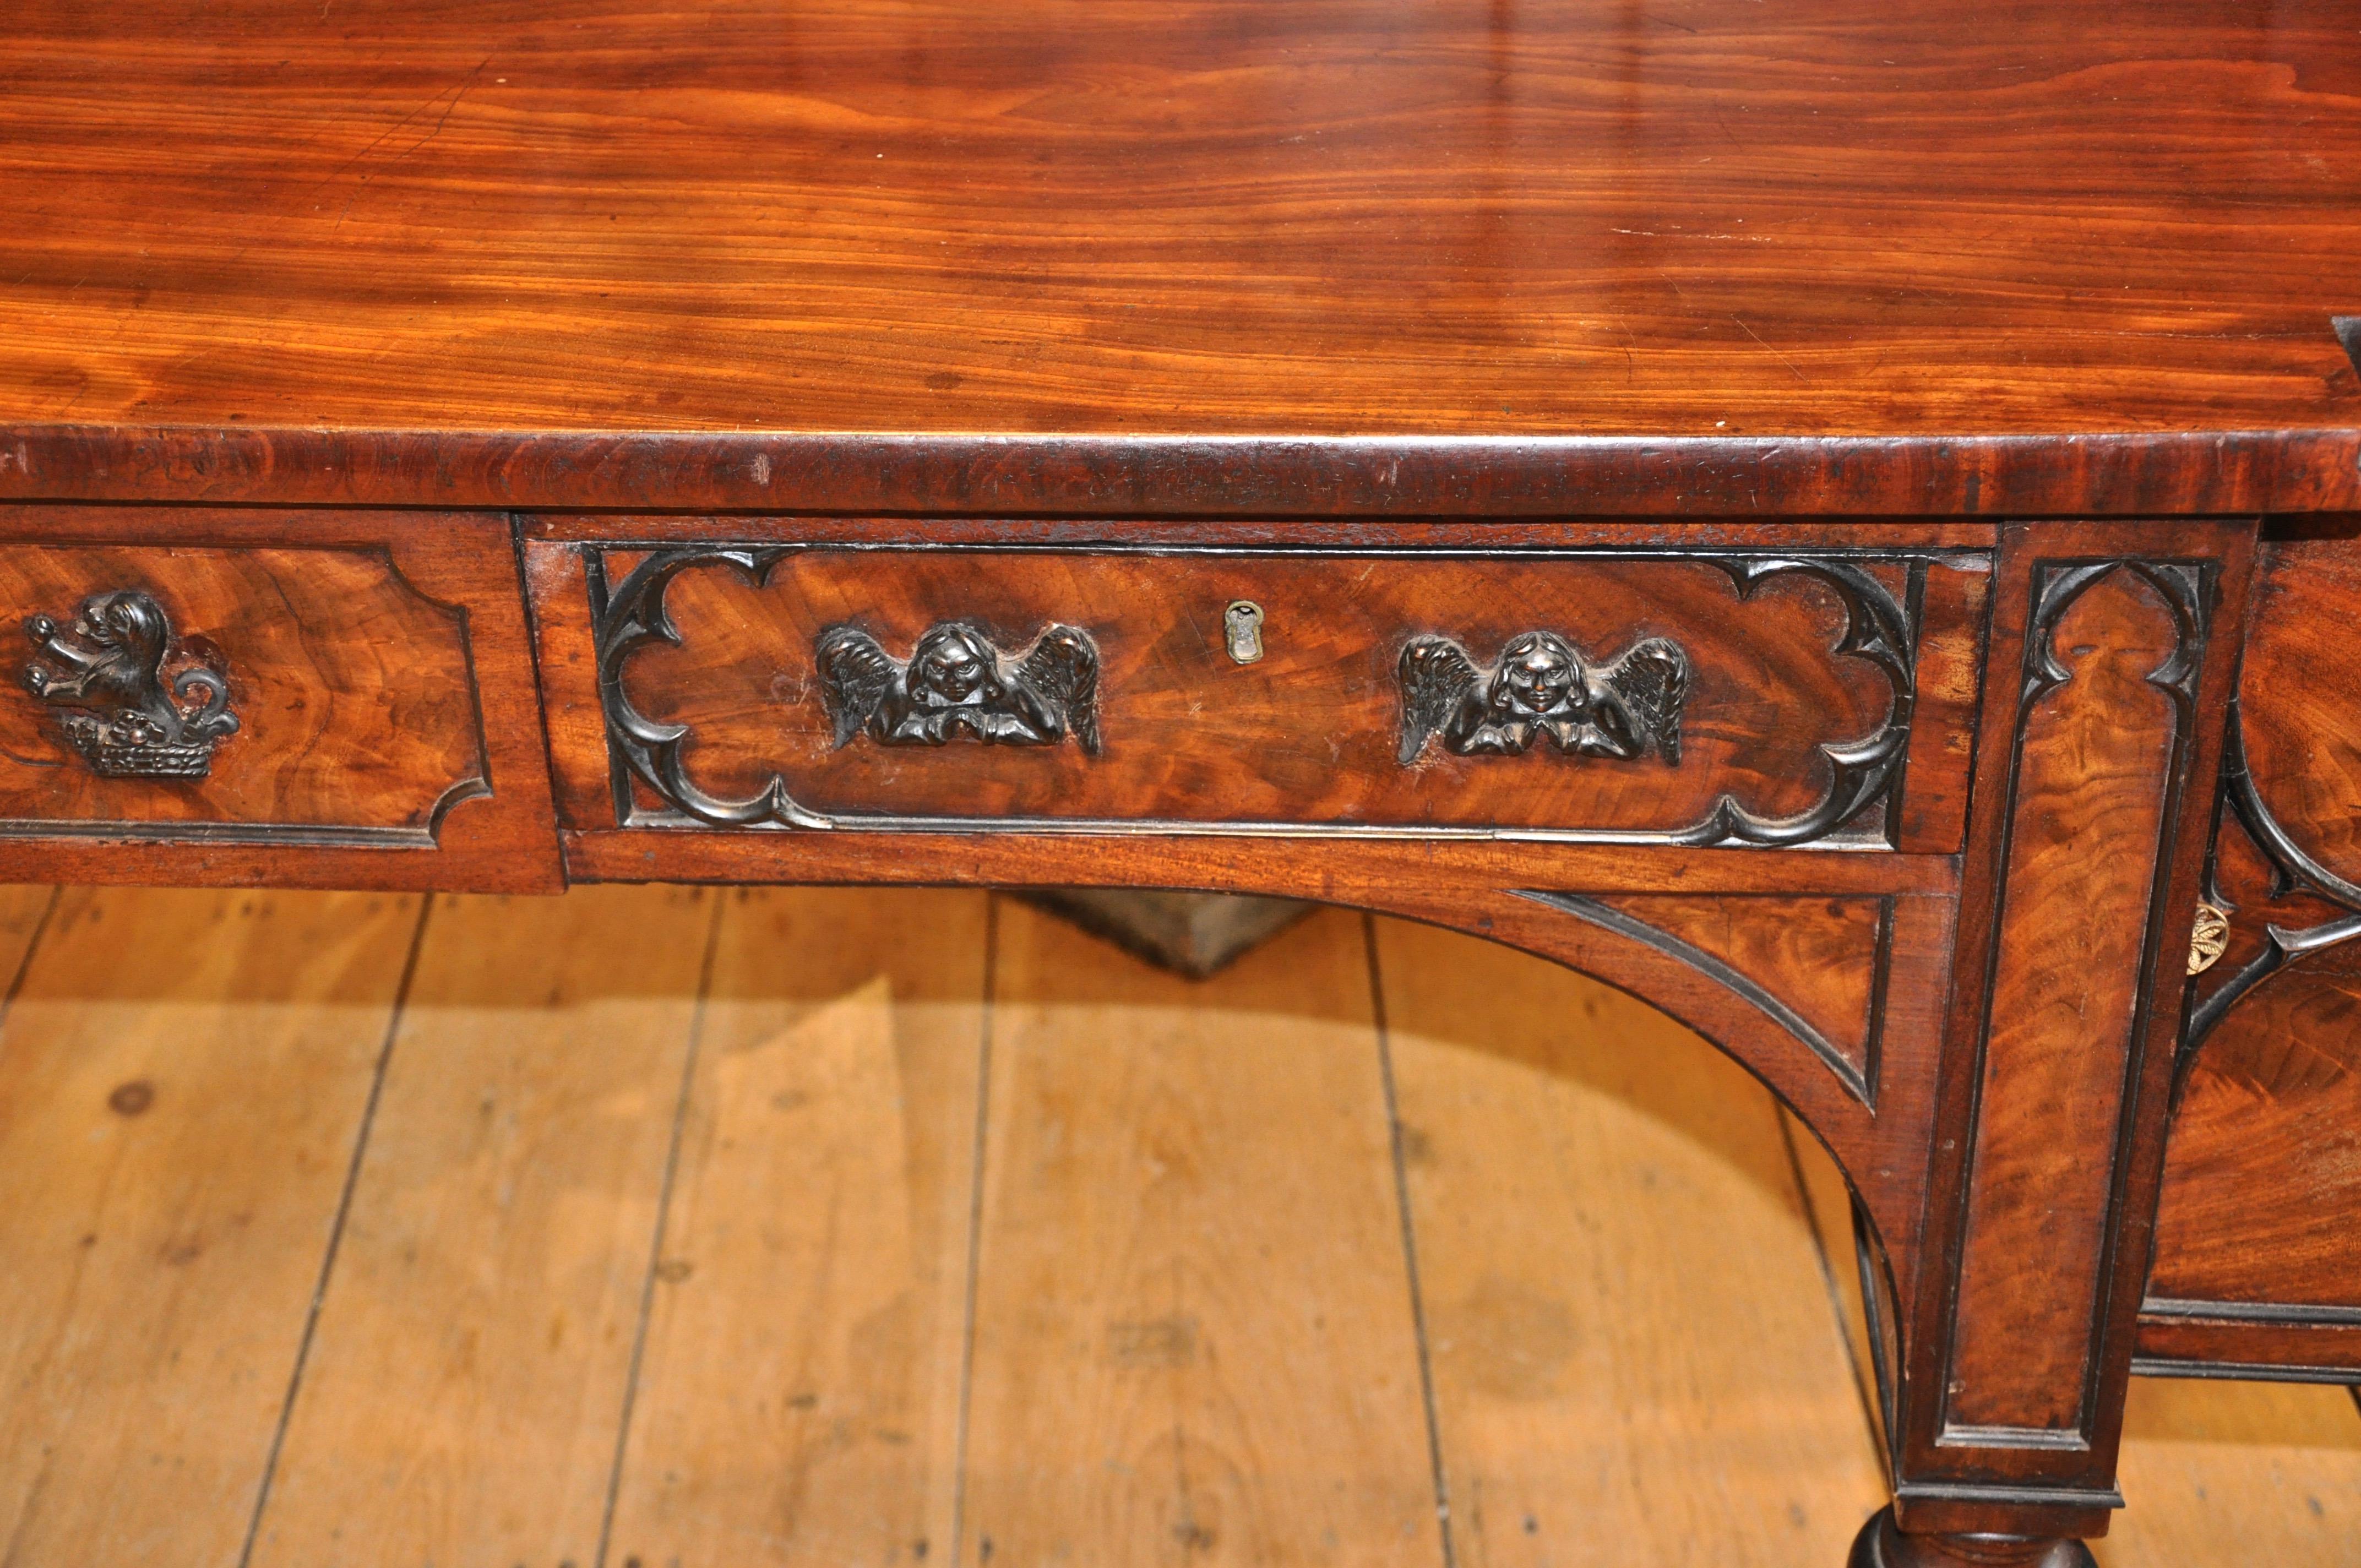 19th Century Period English George III Sideboard in Gothic Taste Gillows of London Attributed